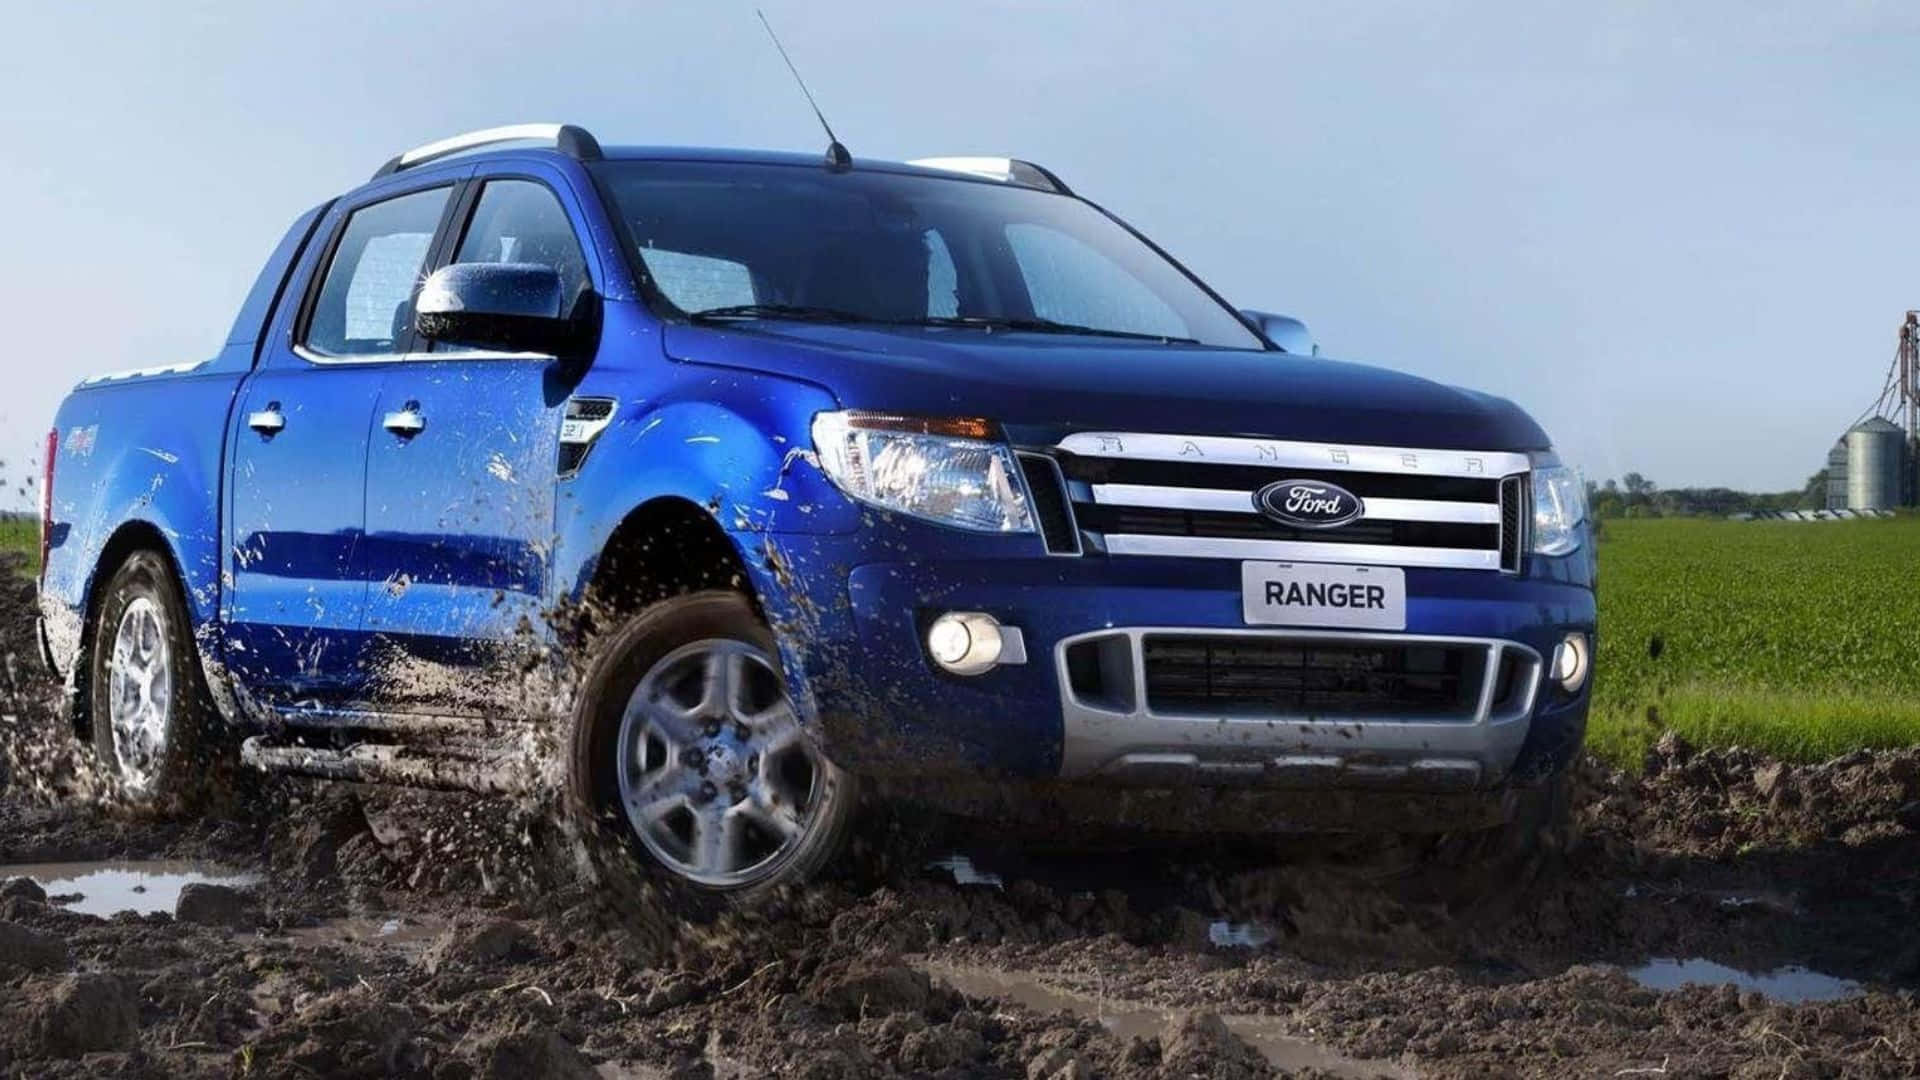 Powerful Ford Ranger conquering the off-road terrain Wallpaper